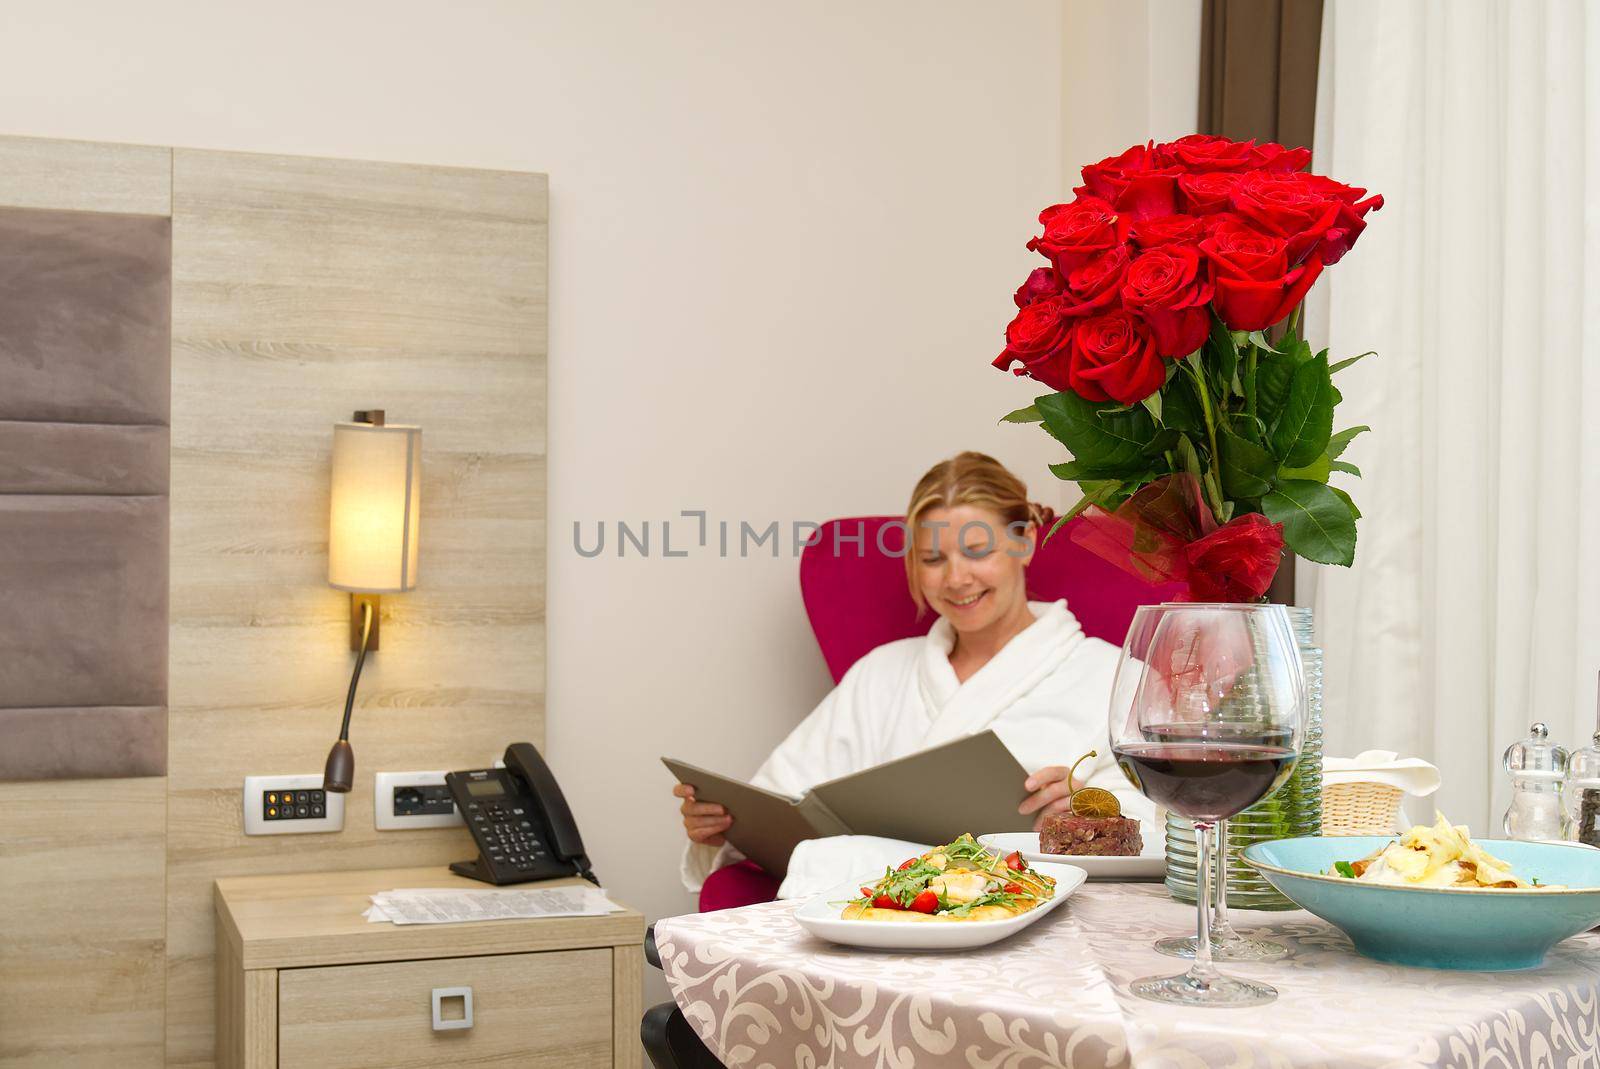 luxury hotel room service, dinner and flowers. Romantic vacation.